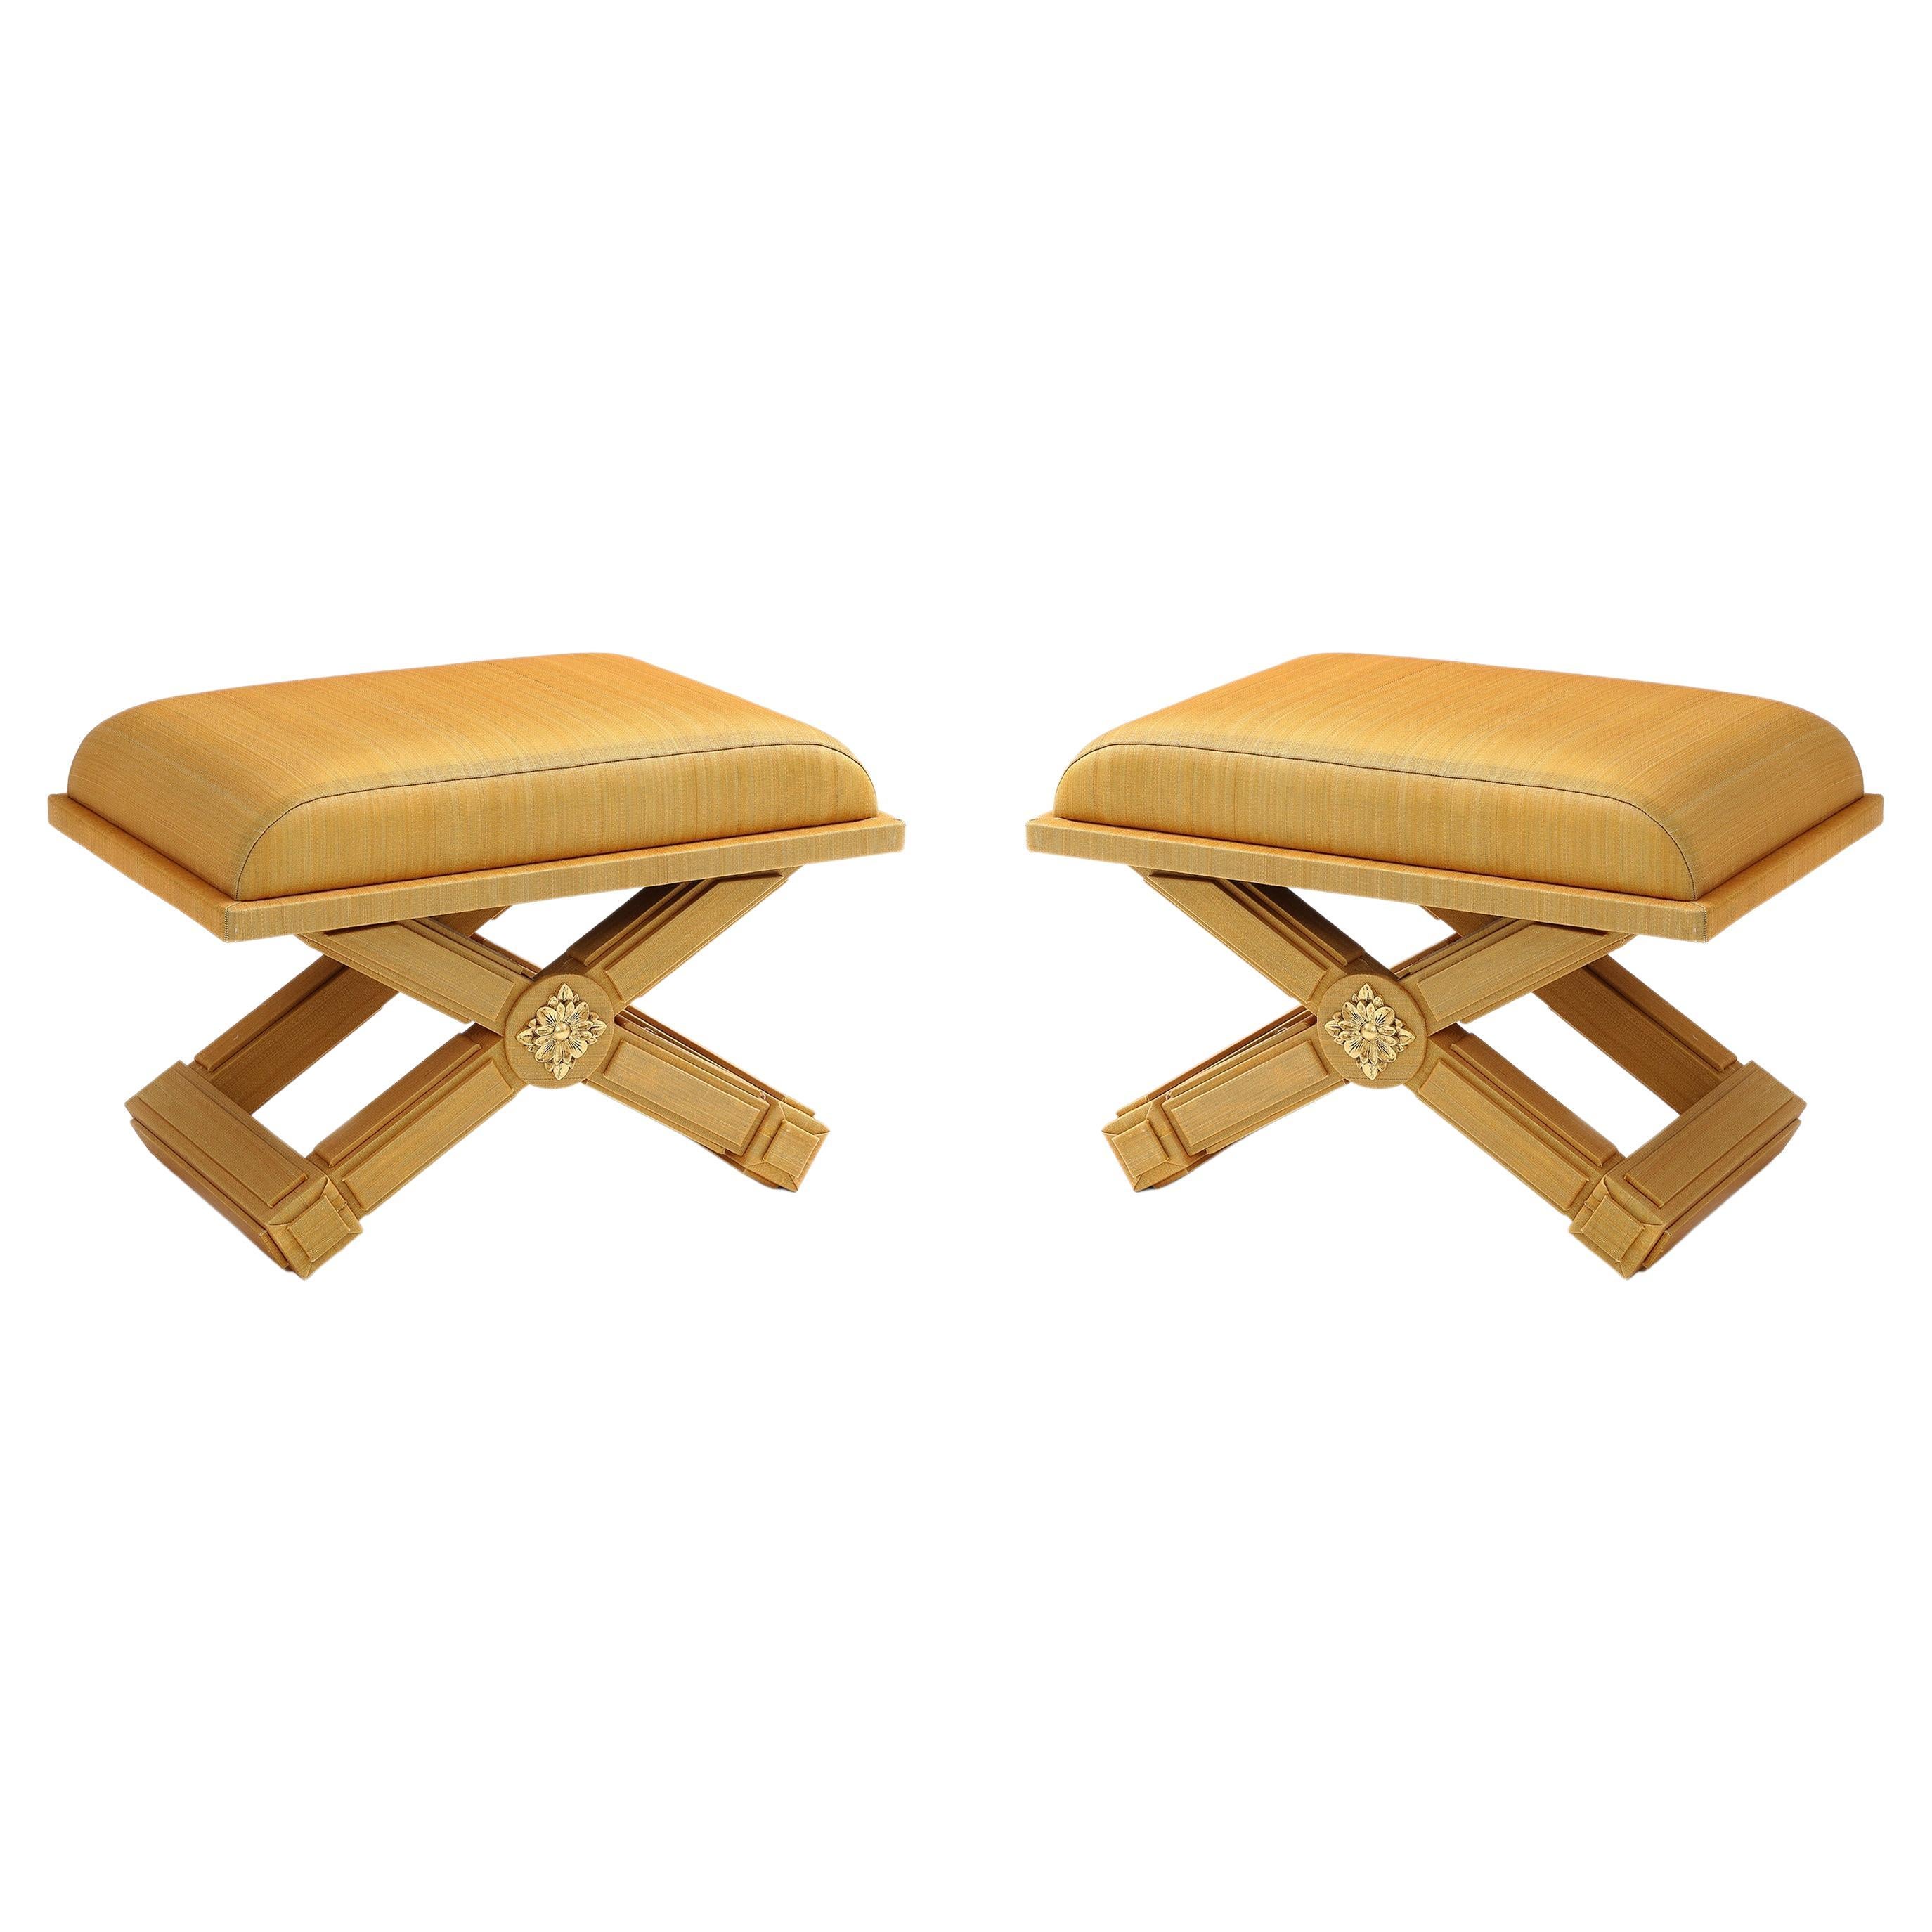 Pair of Horsehair Upholstered X-Form Benches